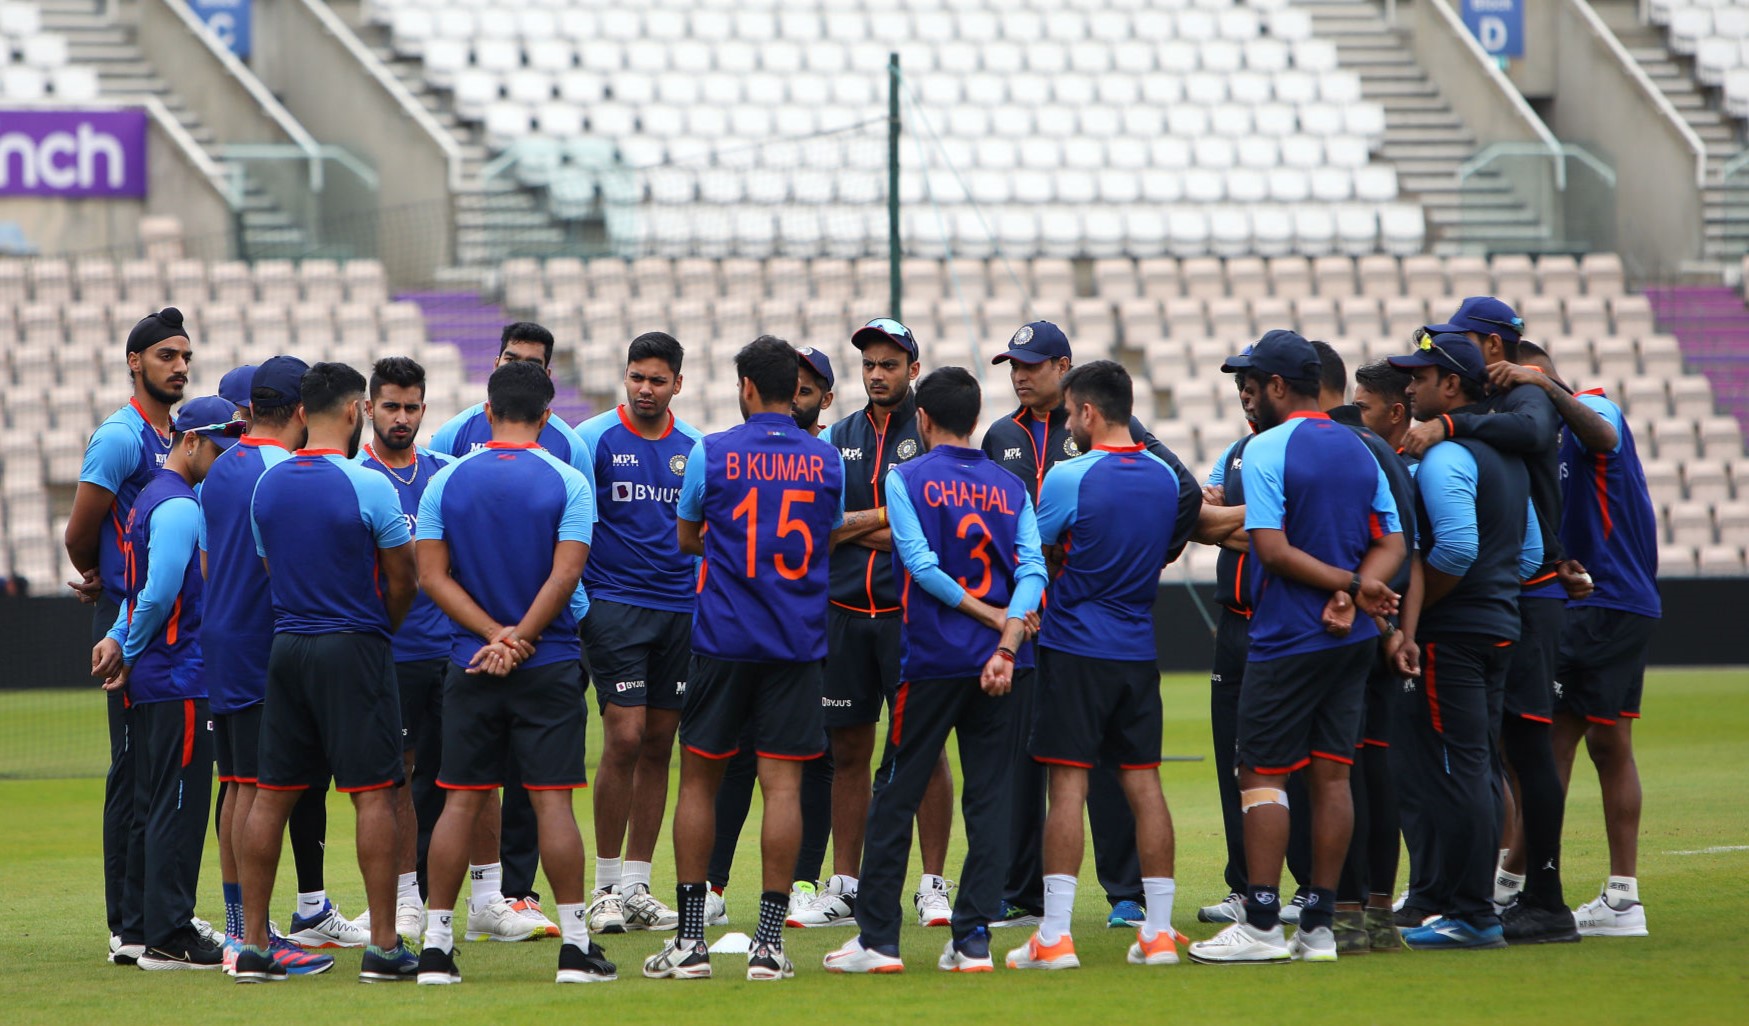 IND vs ENG LIVE: Rohit Sharma joins Team in Southampton, India have practice session ahead of 1st T20 at Ageas Bowl: Follow Live Updates 